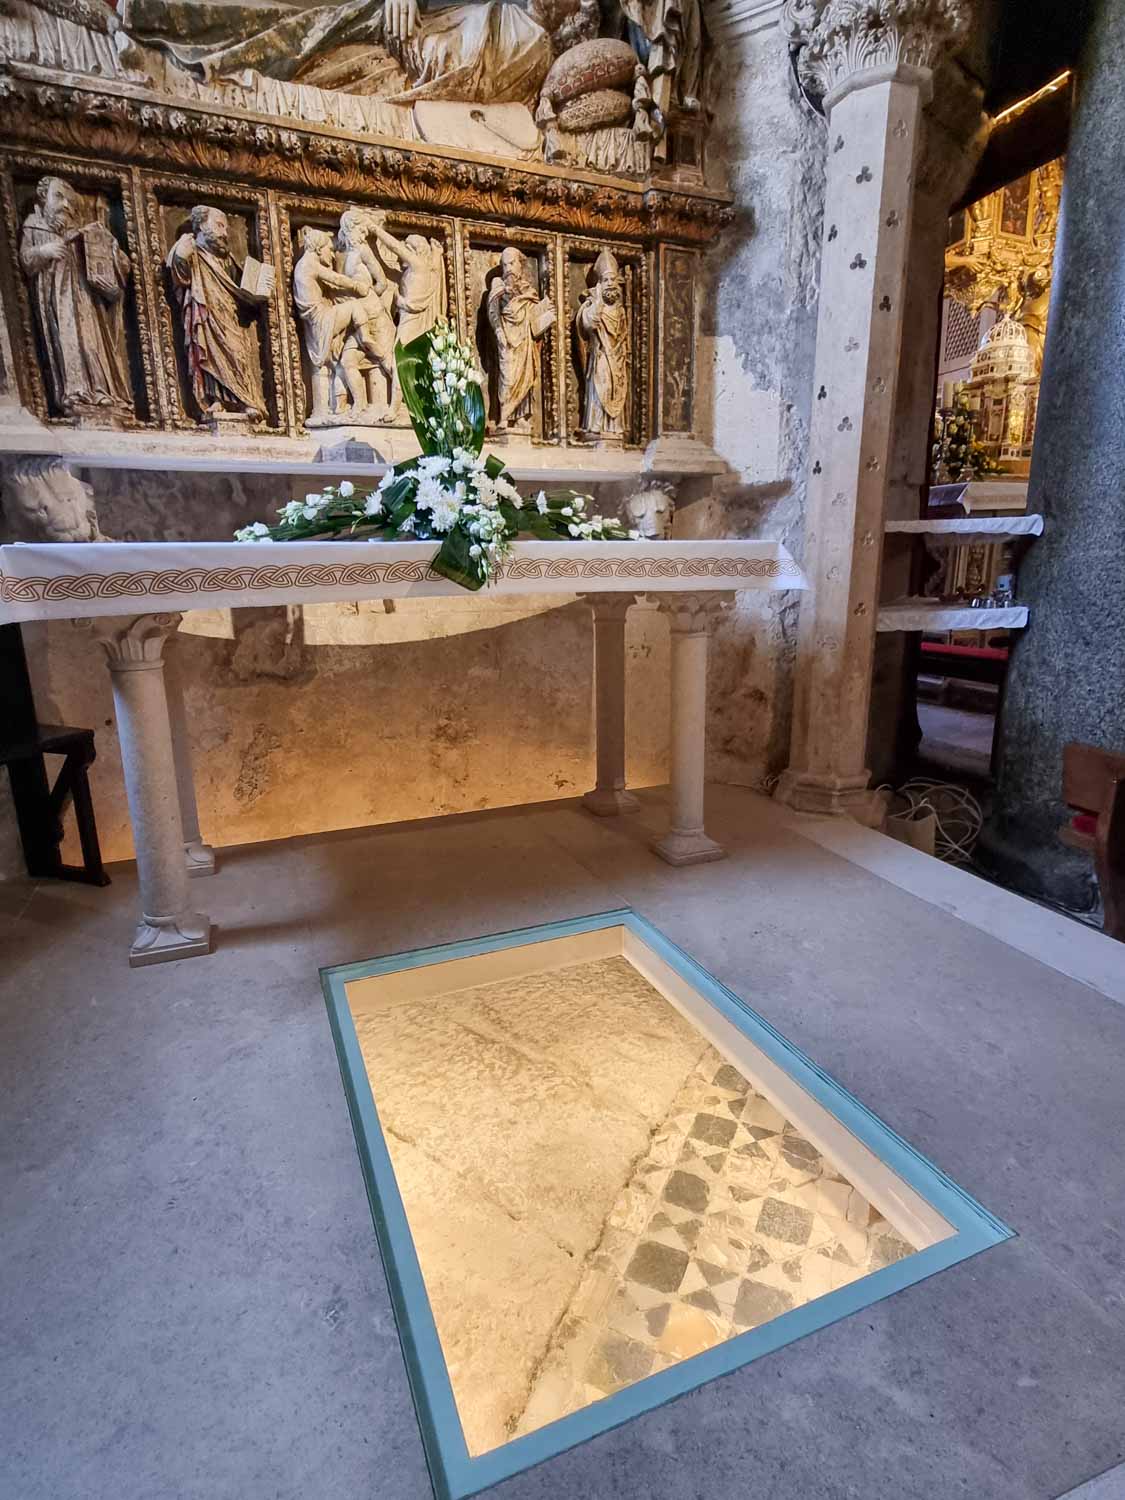 View of part of the old Roman mosaic floor under the current cathedral of St Domnius, formerly Diocletian's Mausoleum - a visit is one of the best things to do with kids in Split